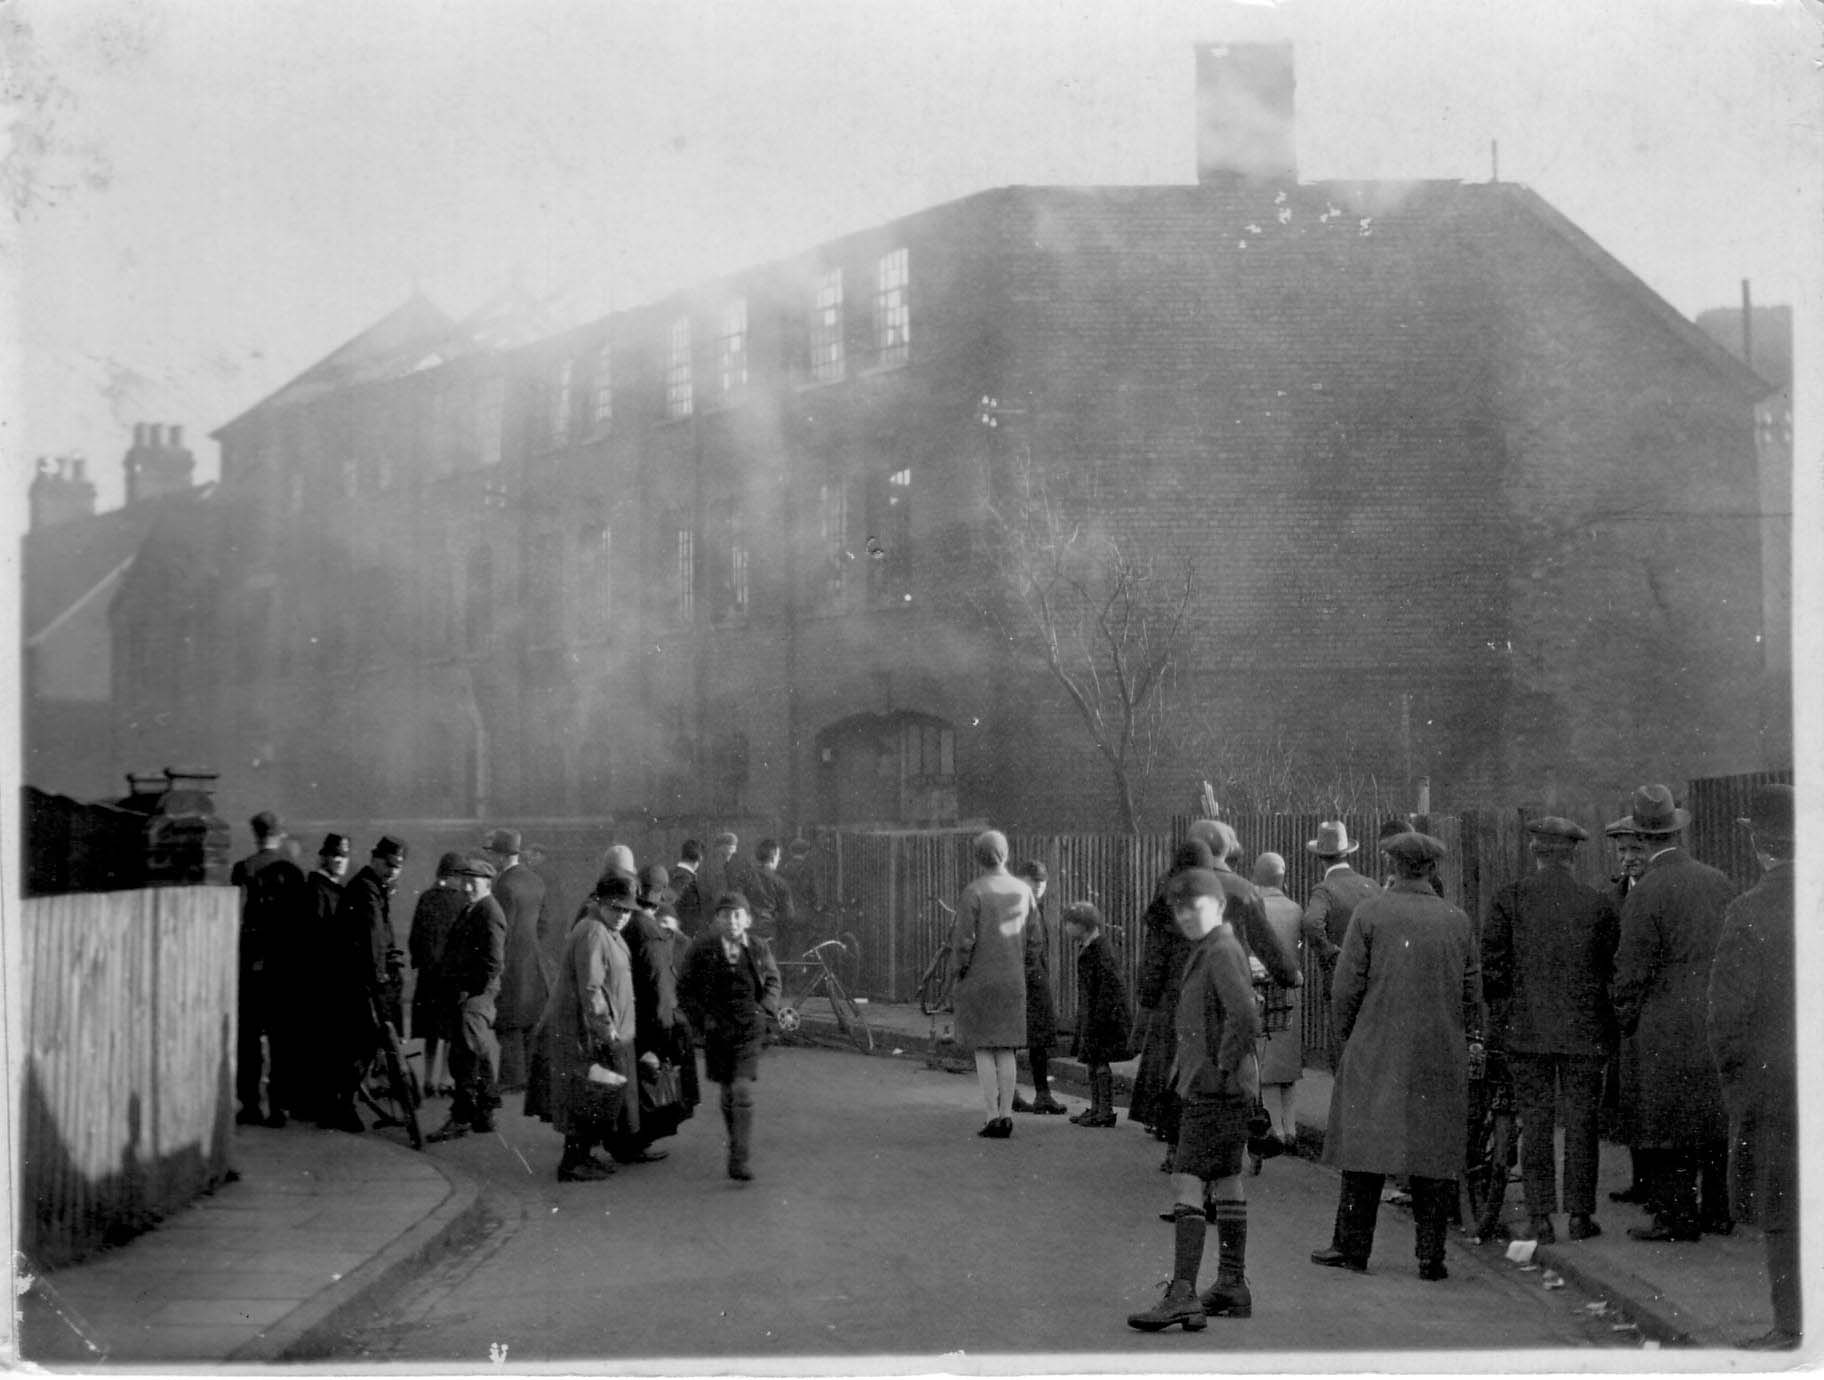 Black and white photo of a building on fire with onlookers